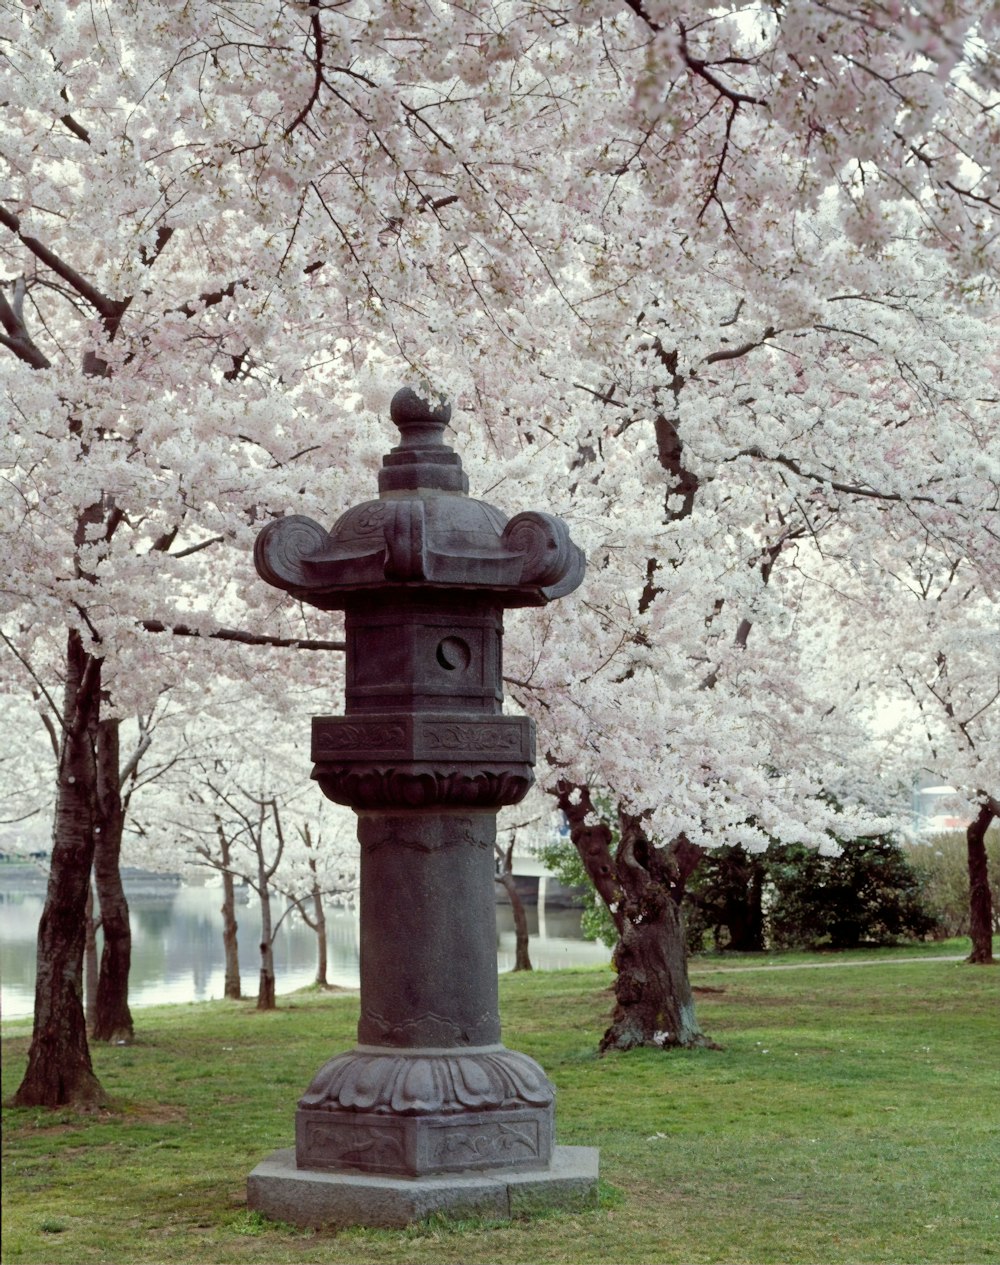 Cherry trees along the Tidal Basin with Japanese Lantern placed in the park in 1954.